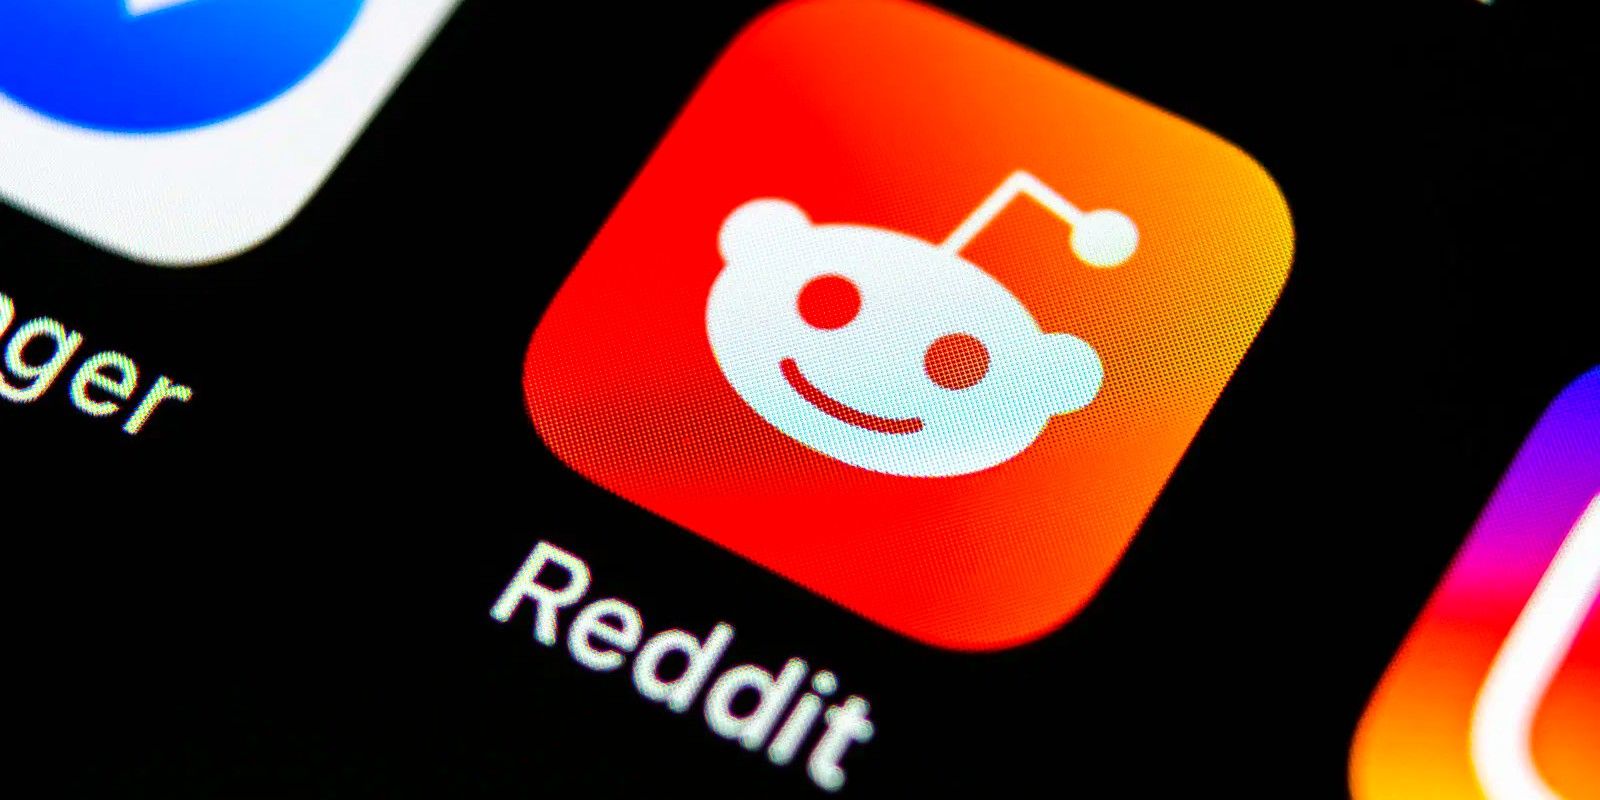 An image of a Reddit app on your mobile screen